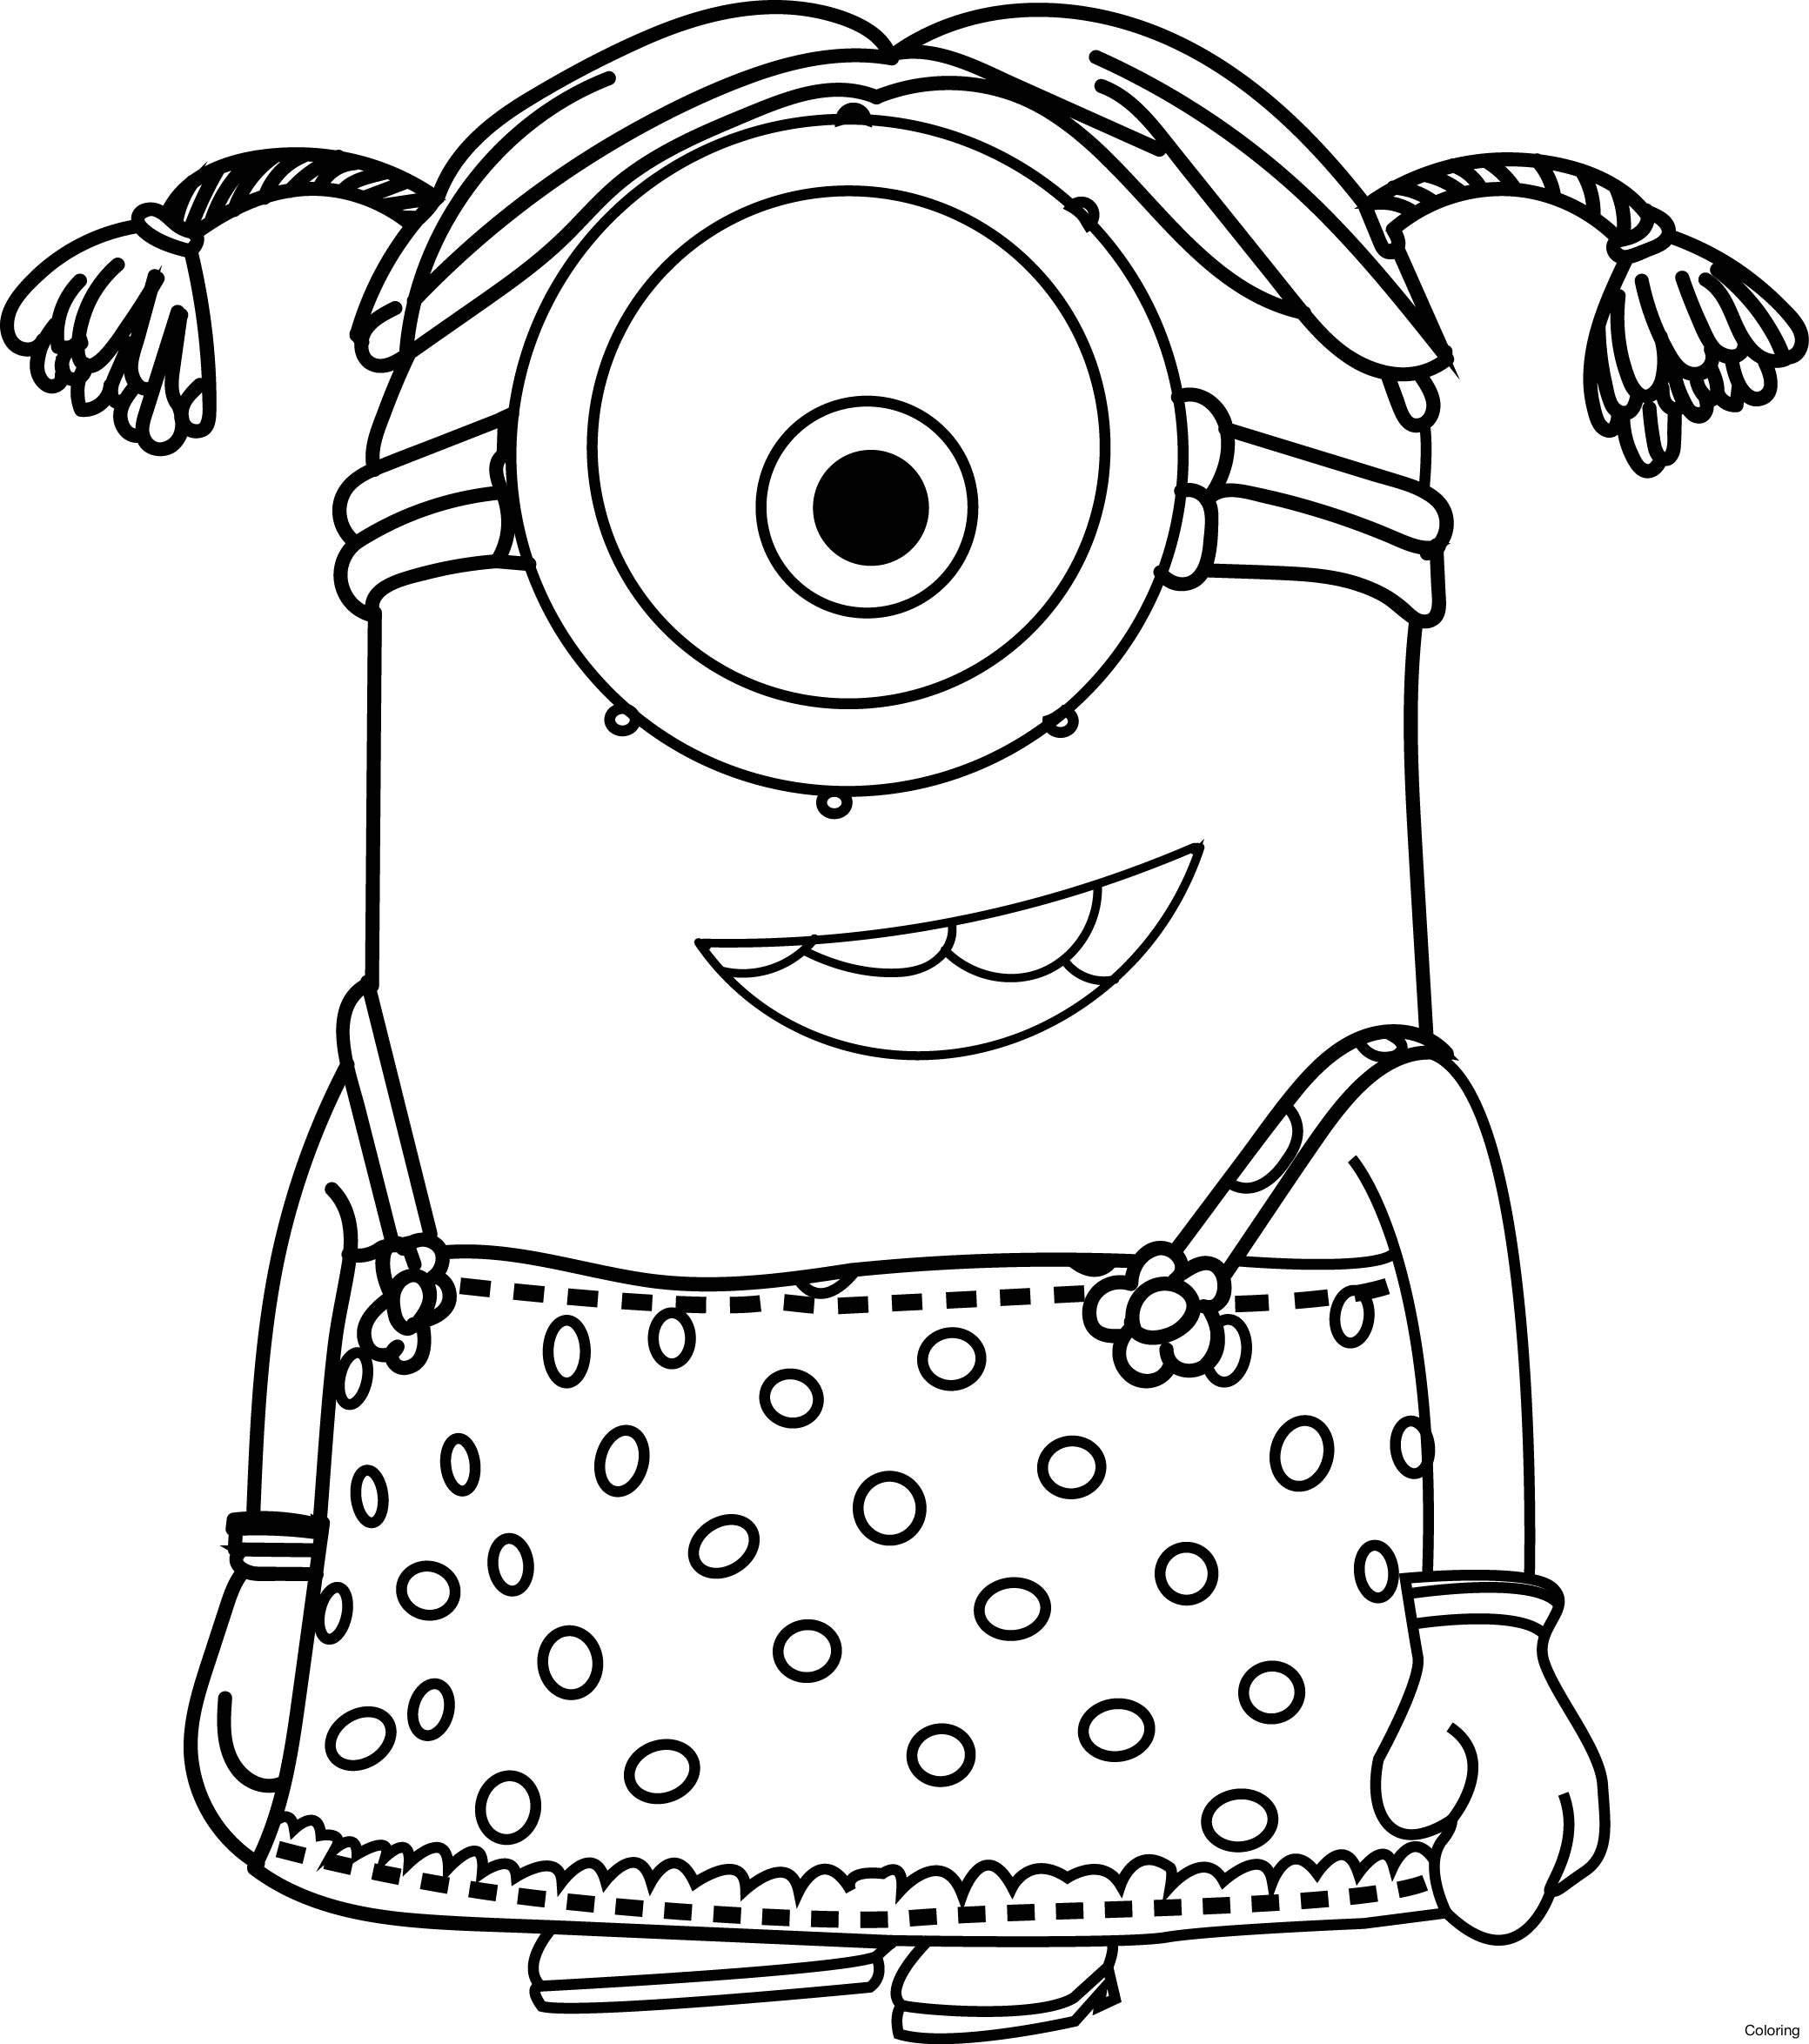 Minion Coloring Pages Kevin At Getcolorings.com | Free Printable